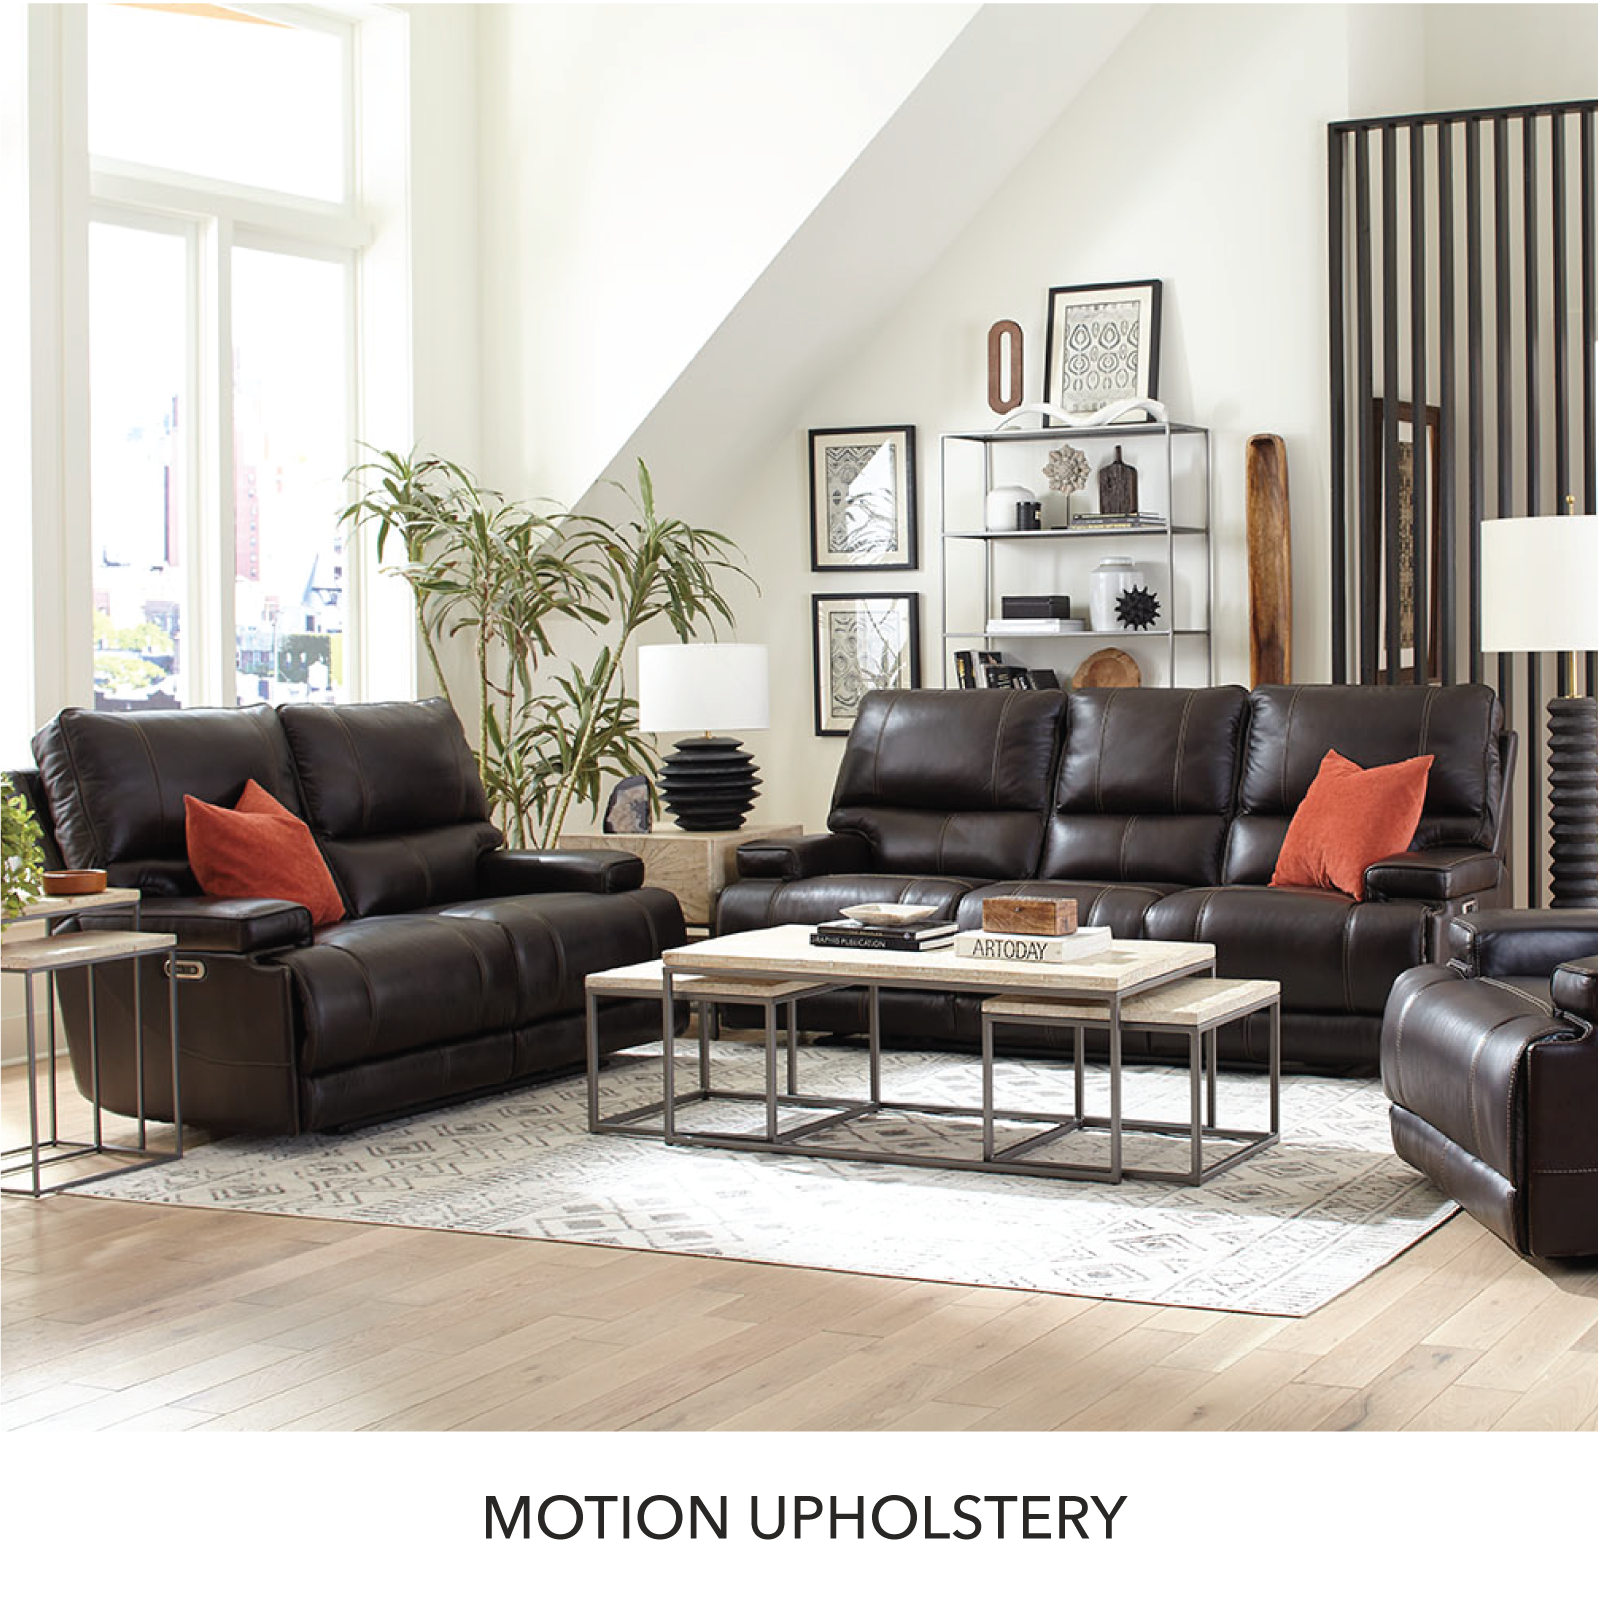 Upholstery - Parker House Furniture